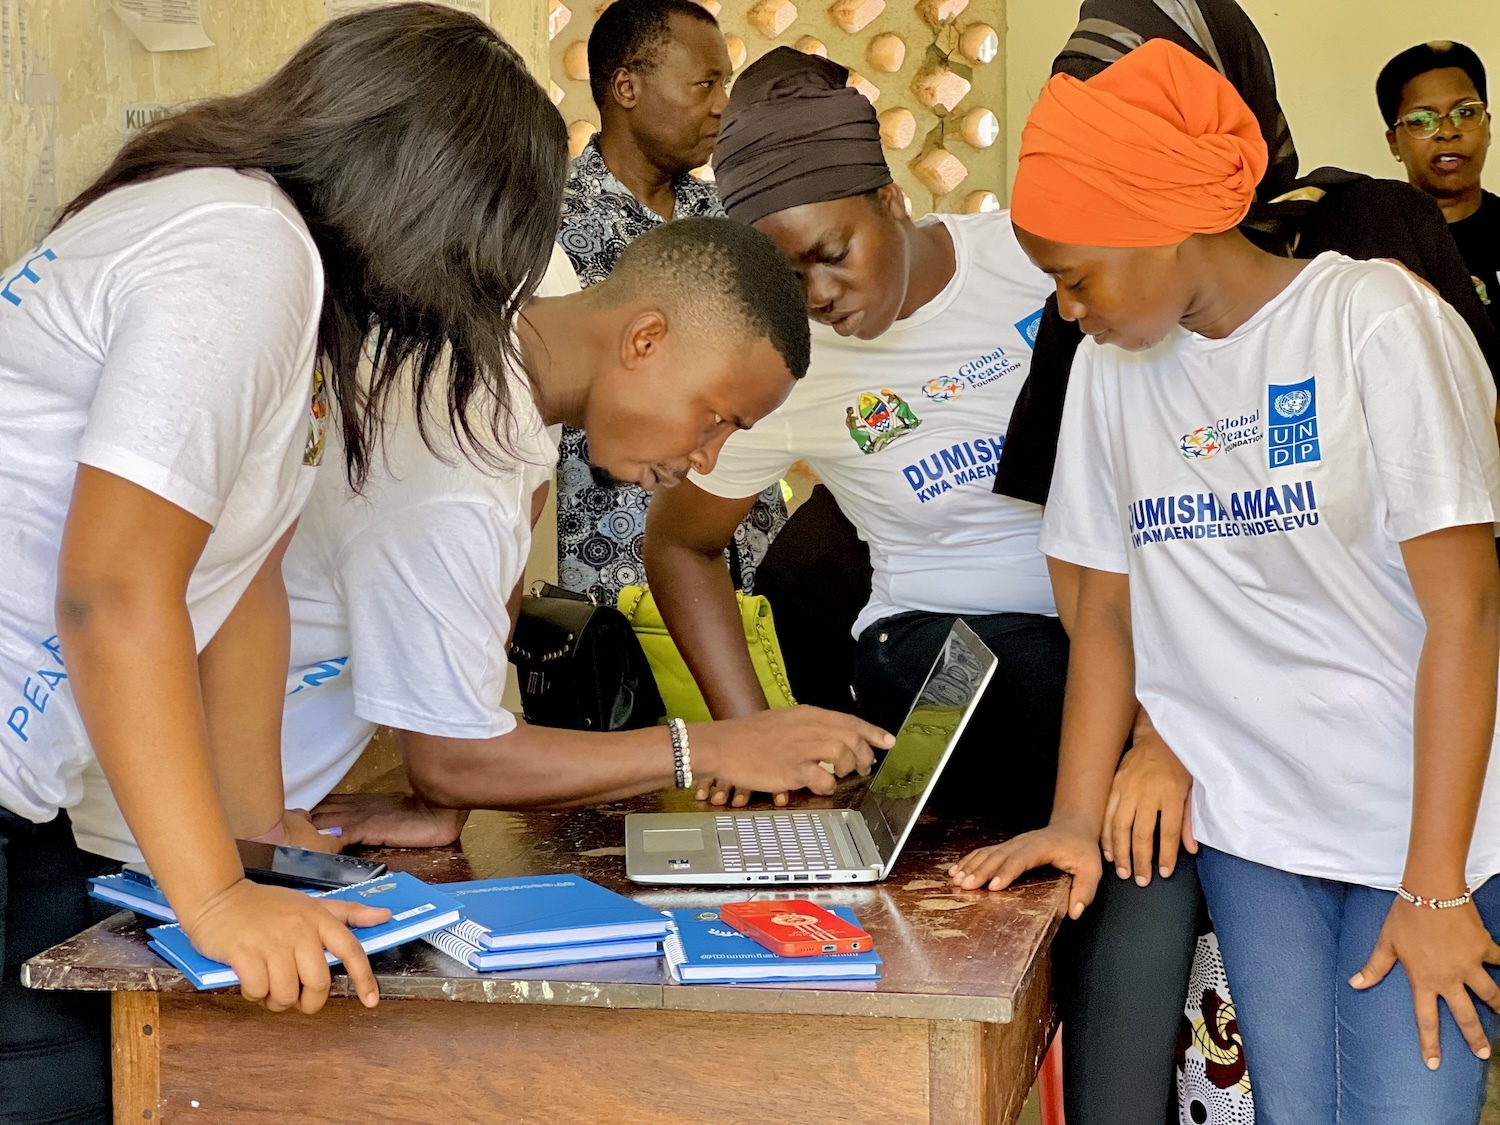 Group of focused individuals in matching t-shirts gathered around a laptop, working as Peacebuilders in Tanzania.